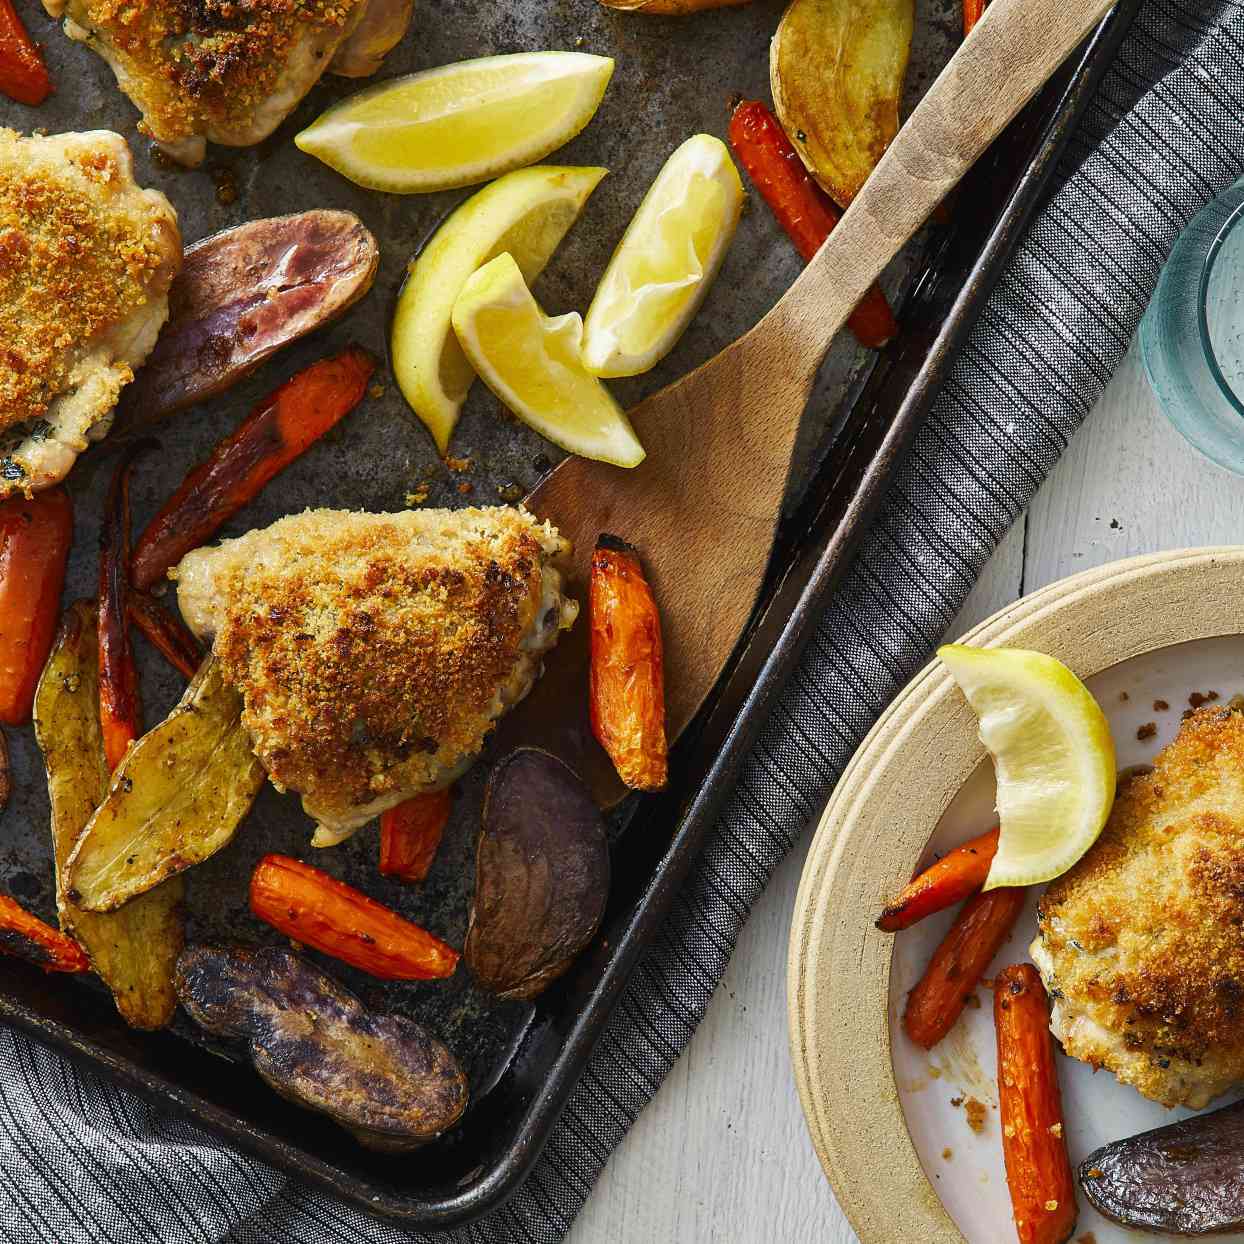 Crispy Lemon-Garlic Chicken Thighs with Roasted Potatoes and Carrots